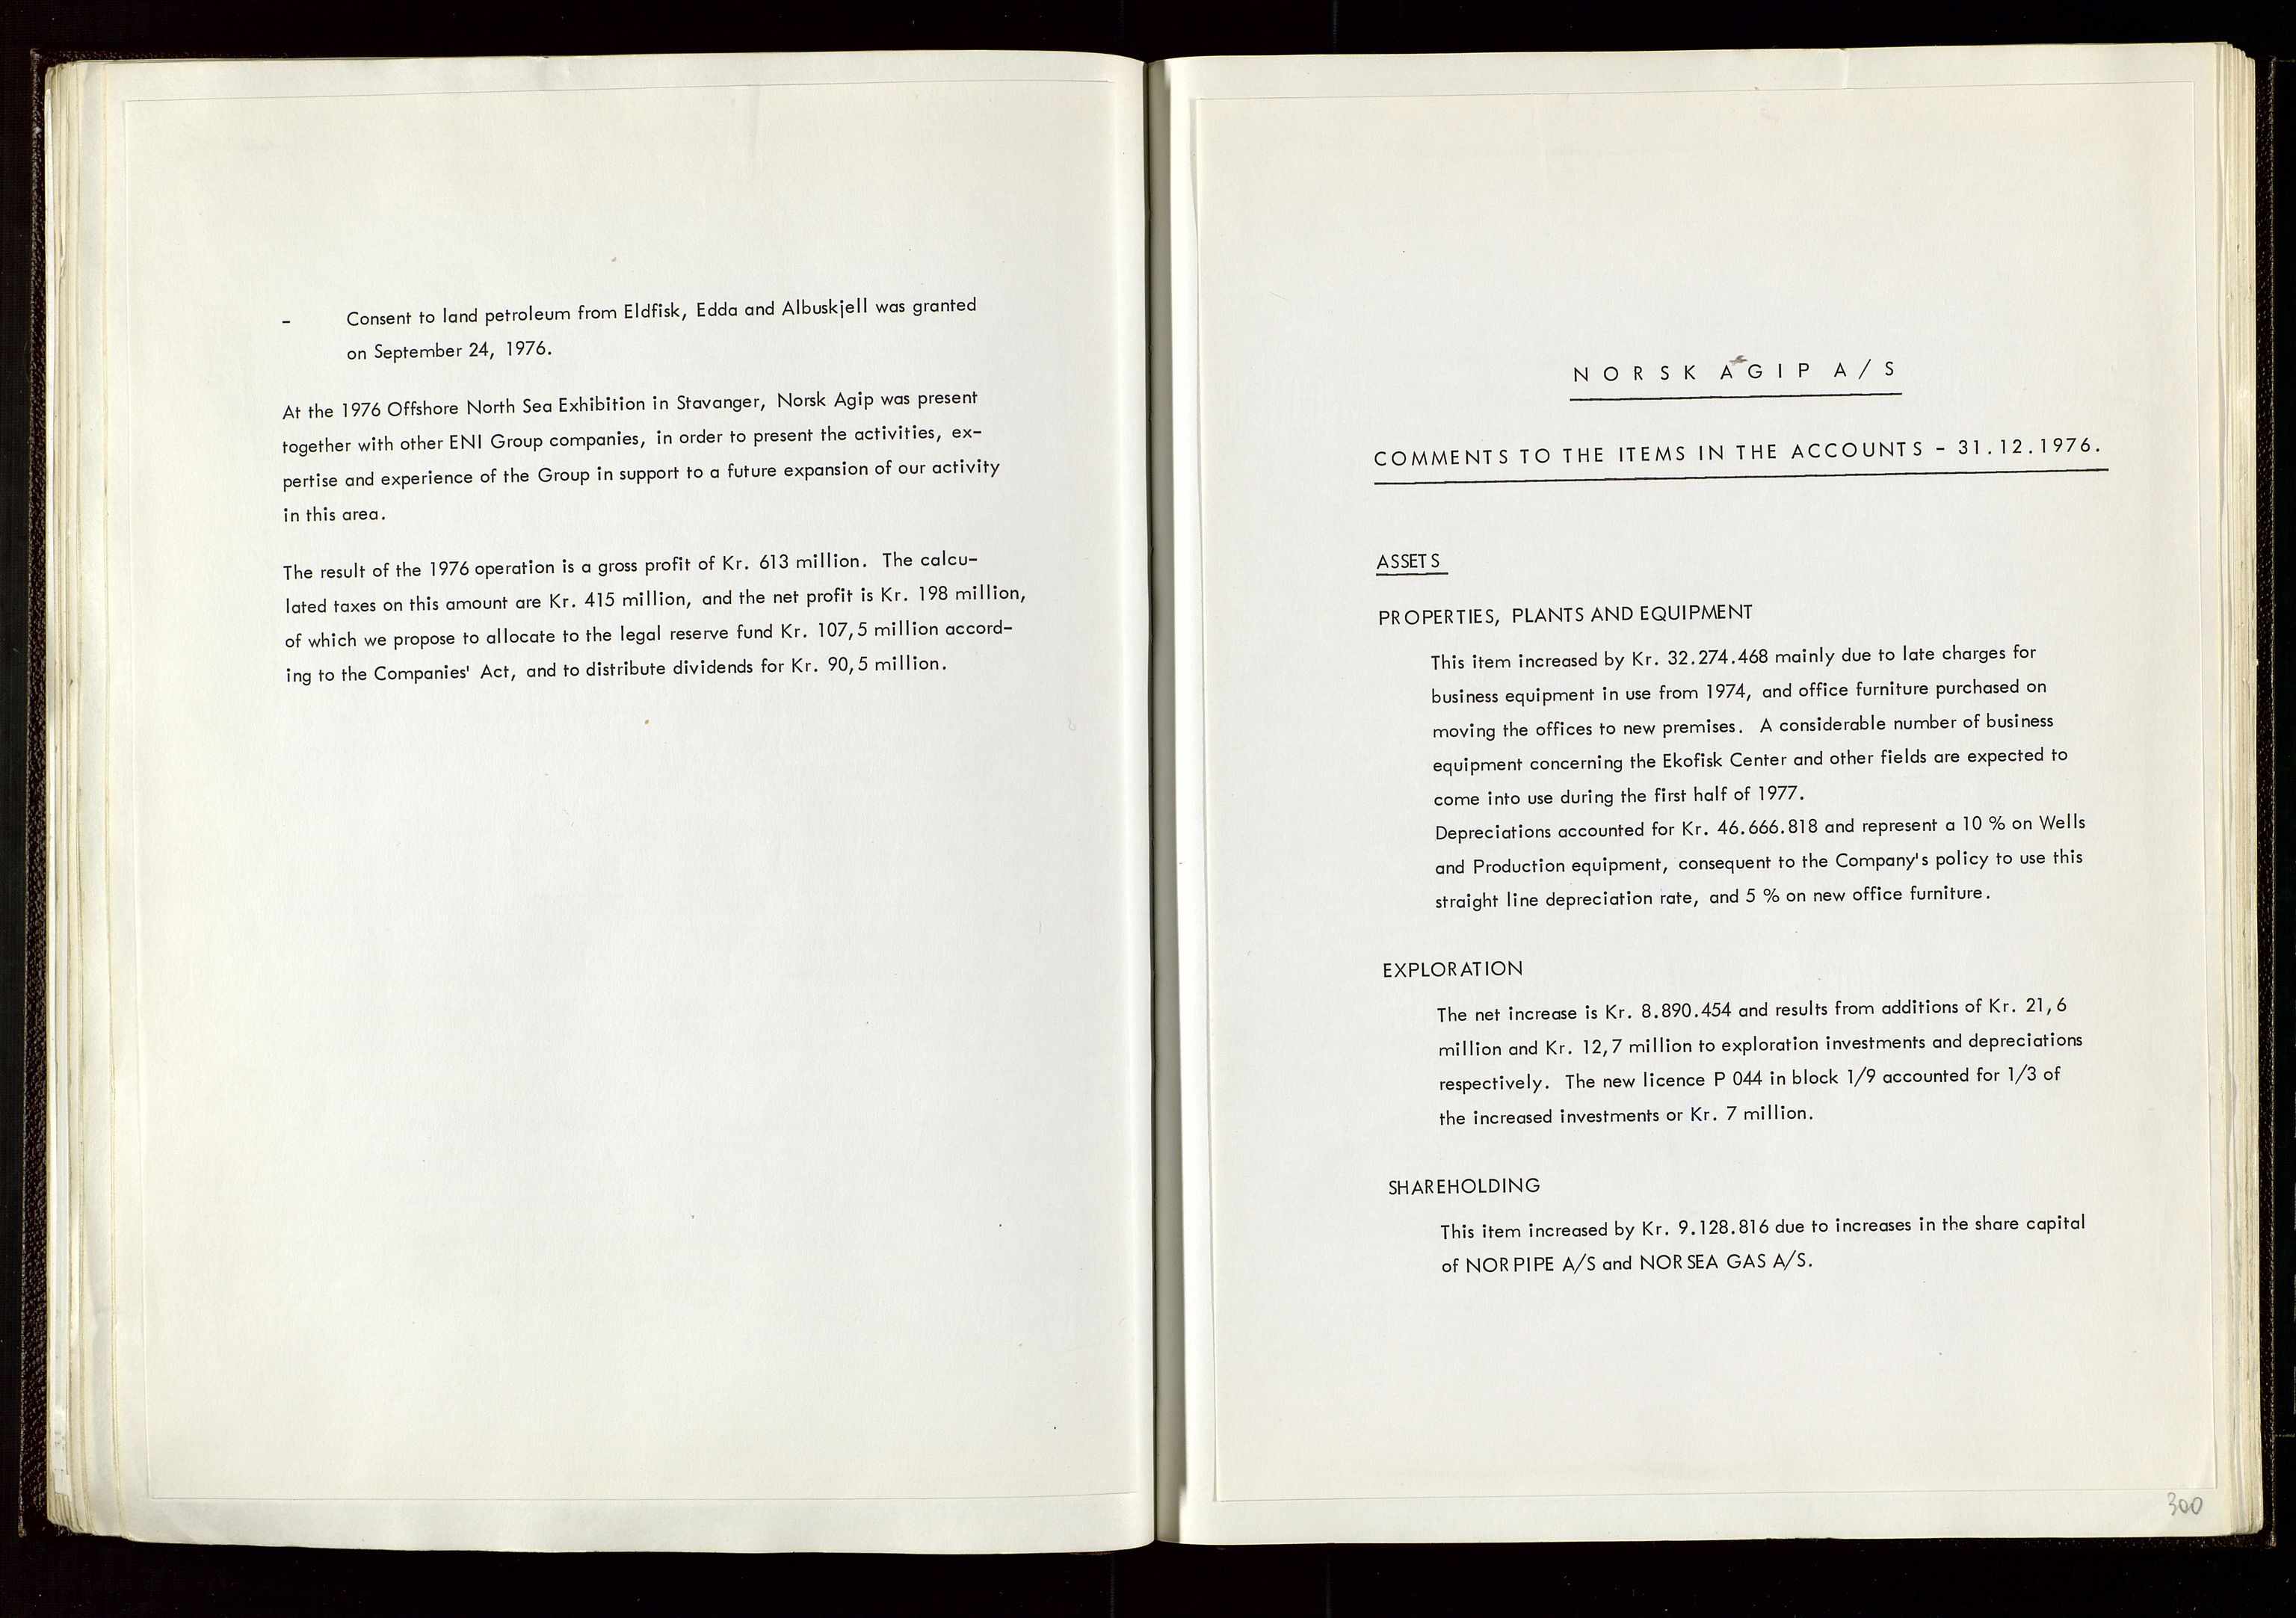 Pa 1583 - Norsk Agip AS, SAST/A-102138/A/Aa/L0002: General assembly and Board of Directors meeting minutes, 1972-1979, s. 299-300